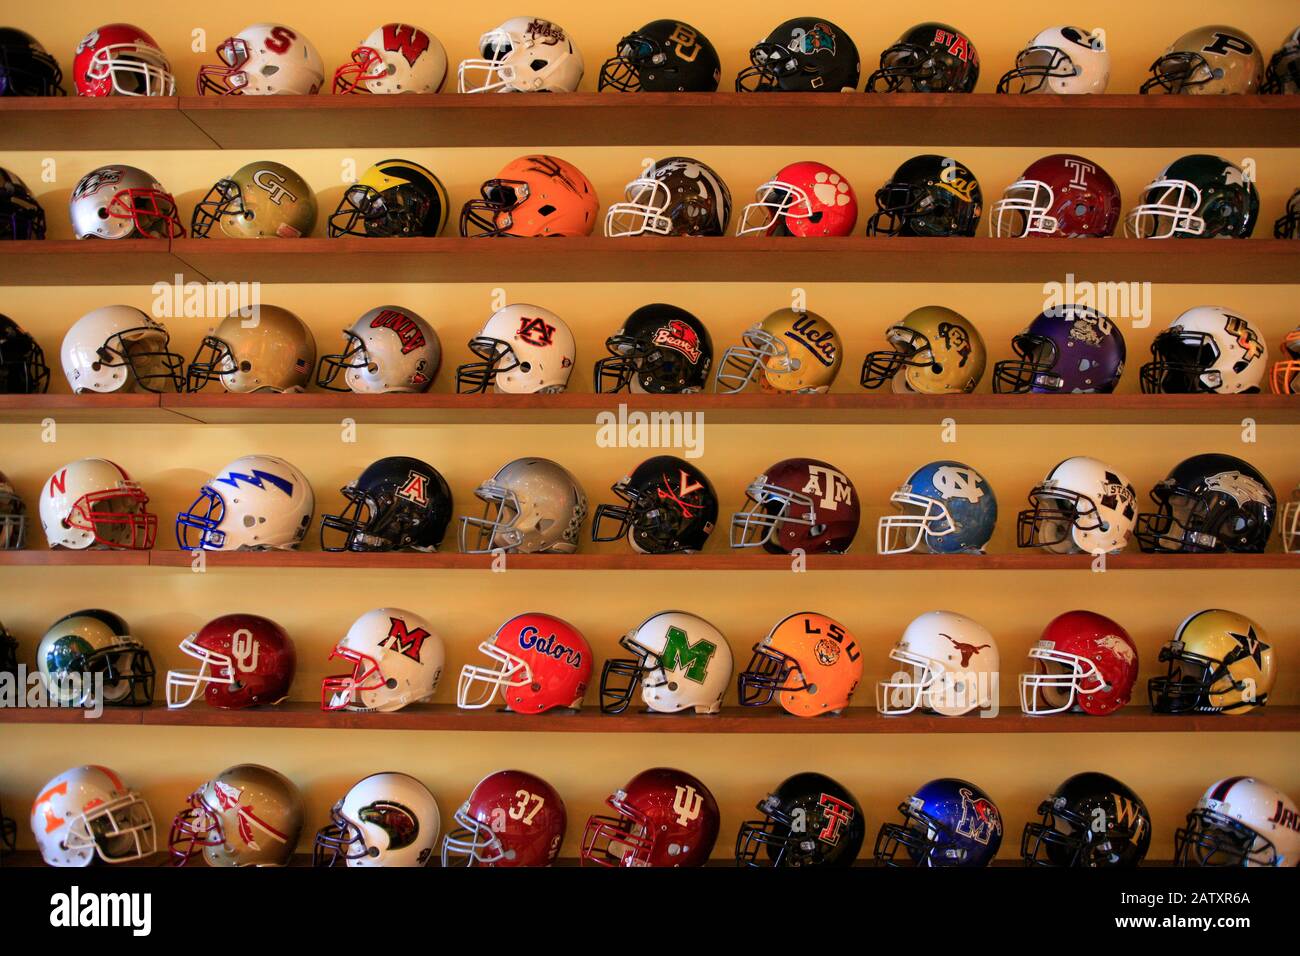 Collection of College Football helmets inside the Ziegler Fiesta Bowl ...